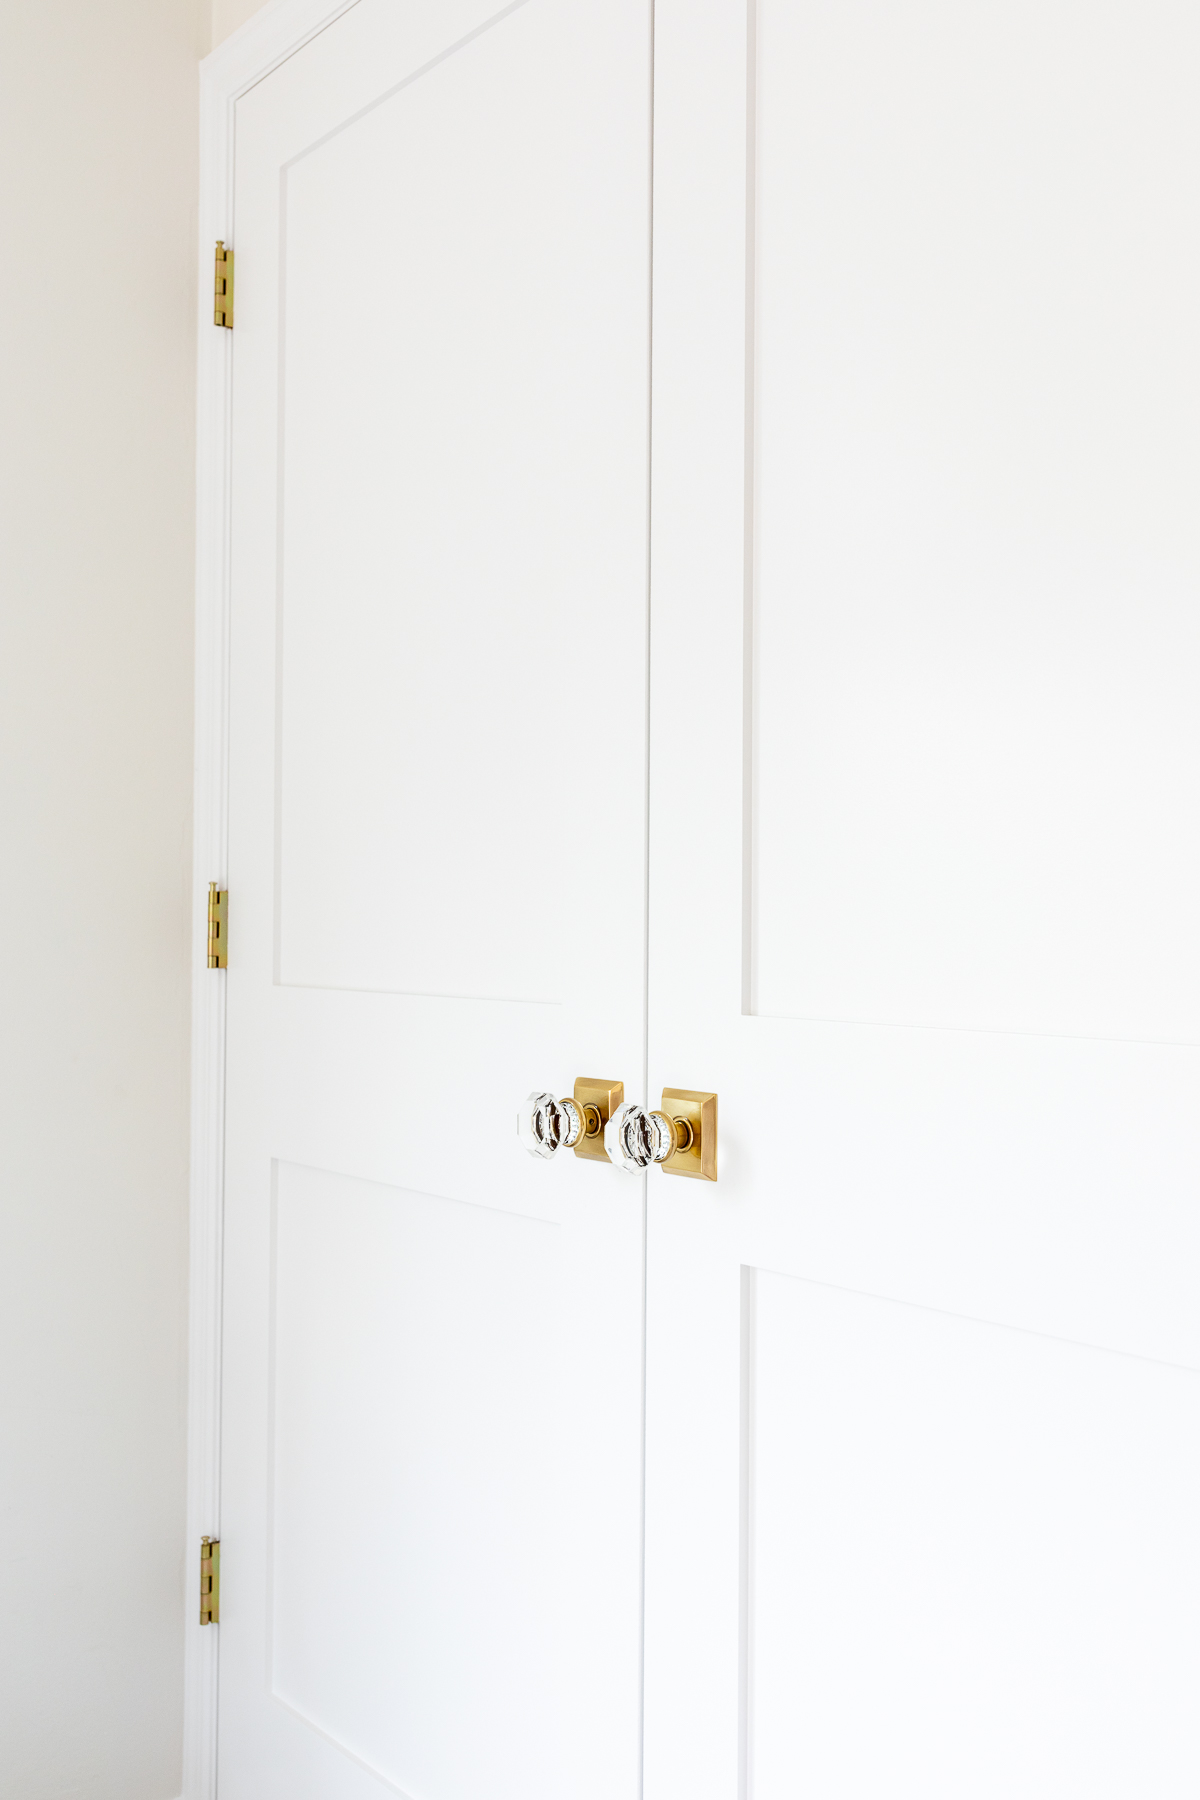 A closed white door, painted to perfection with brass handles, for an elegant interior.